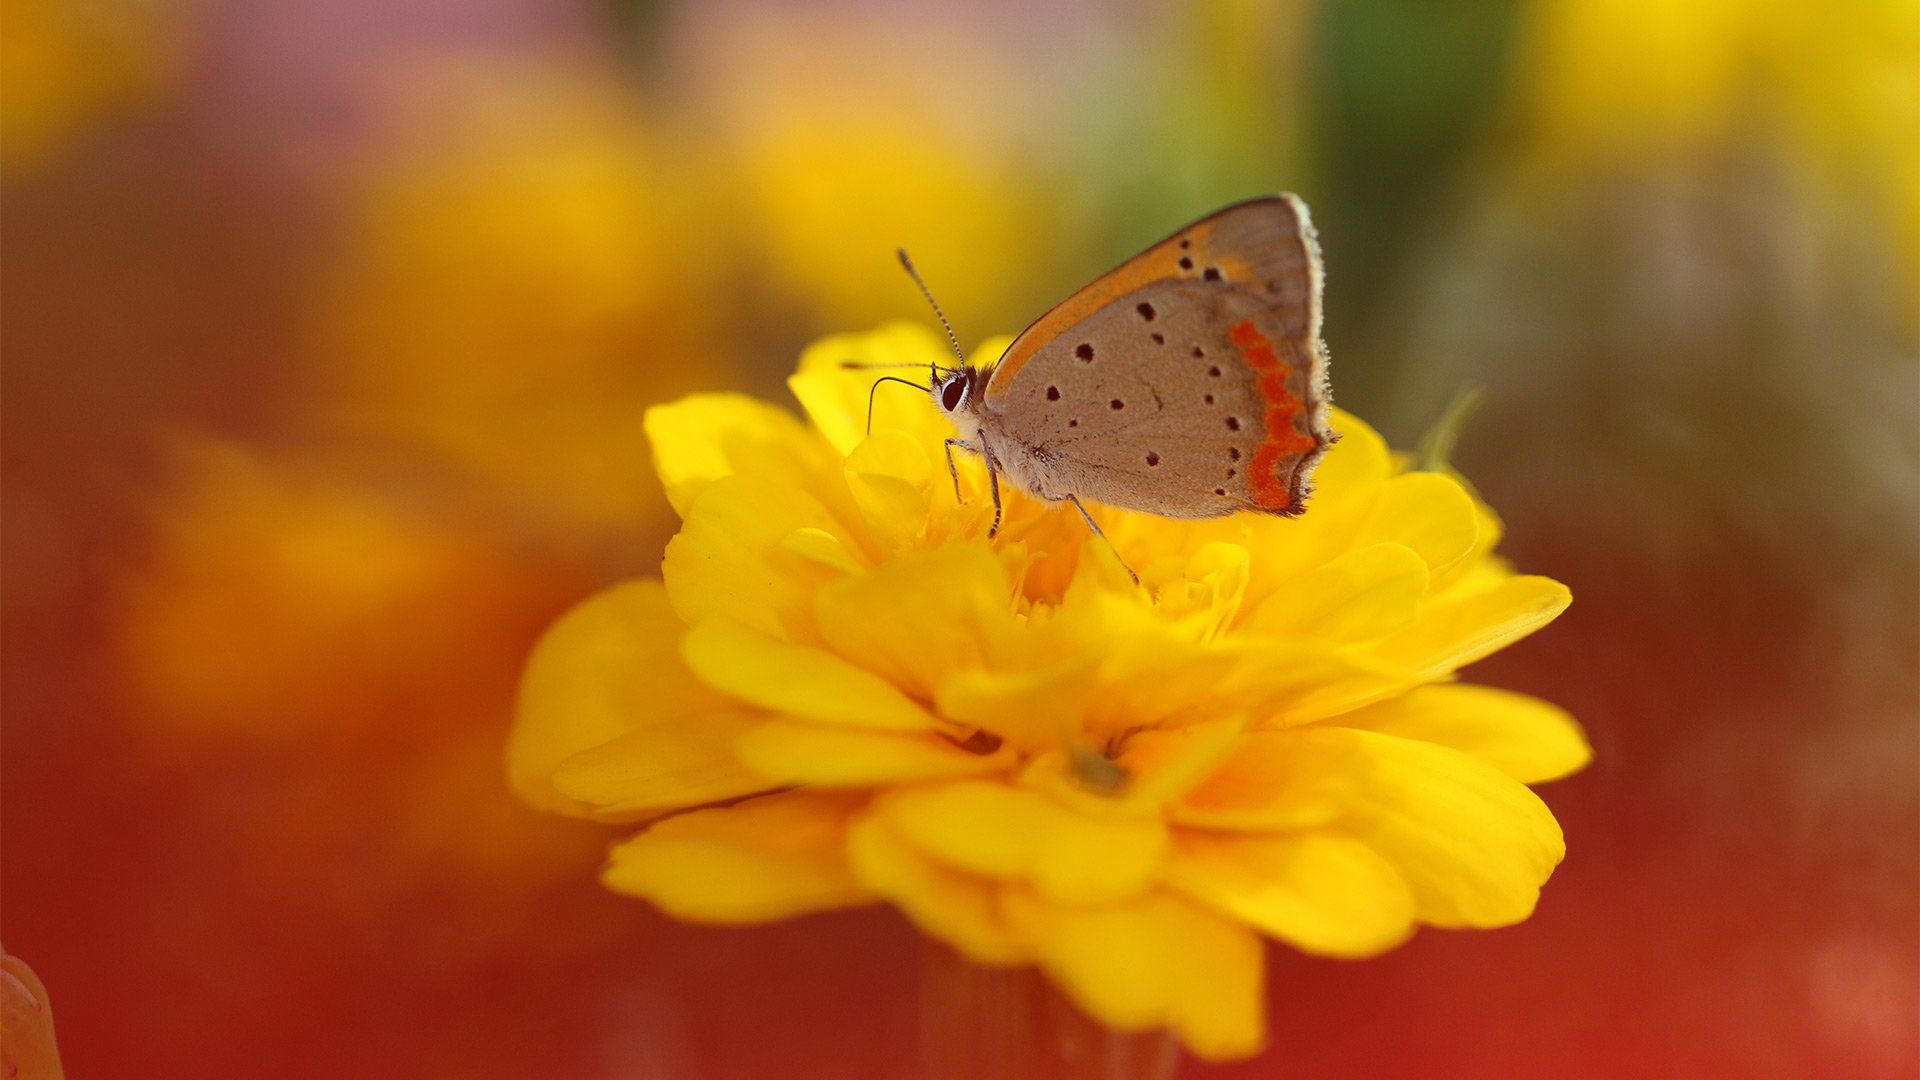 A close-up of a butterfly on a yellow flower, with the background blurred.